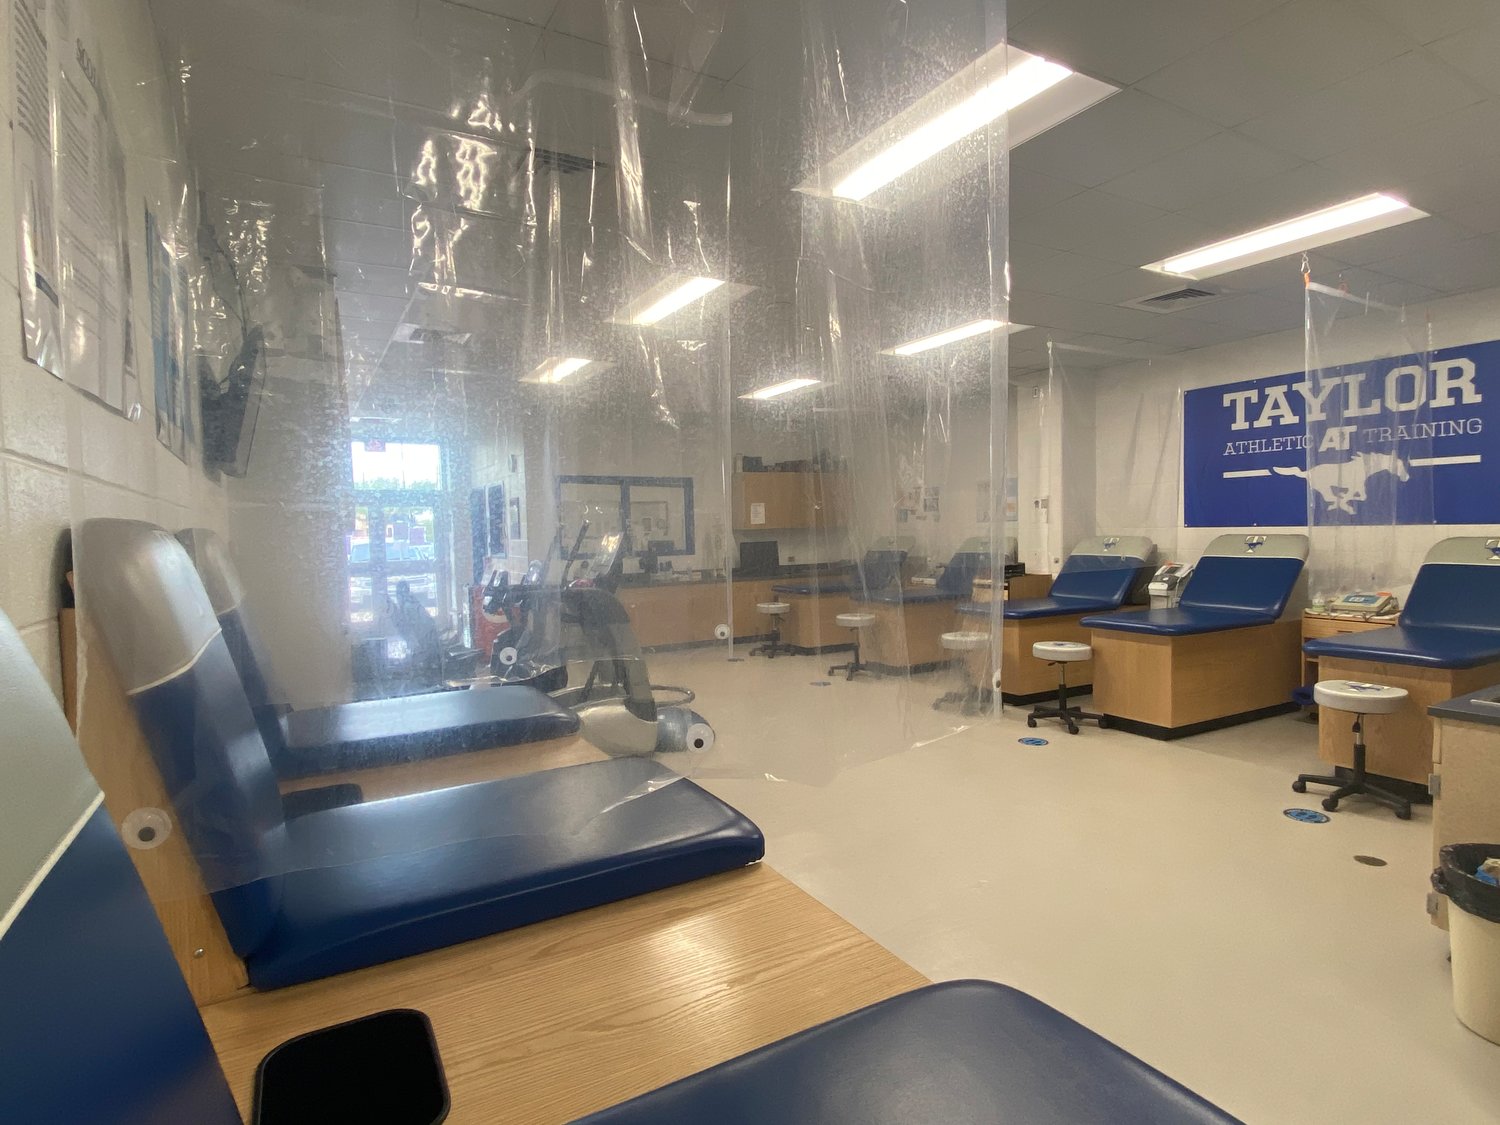 Pictured is the Taylor athletic training room.